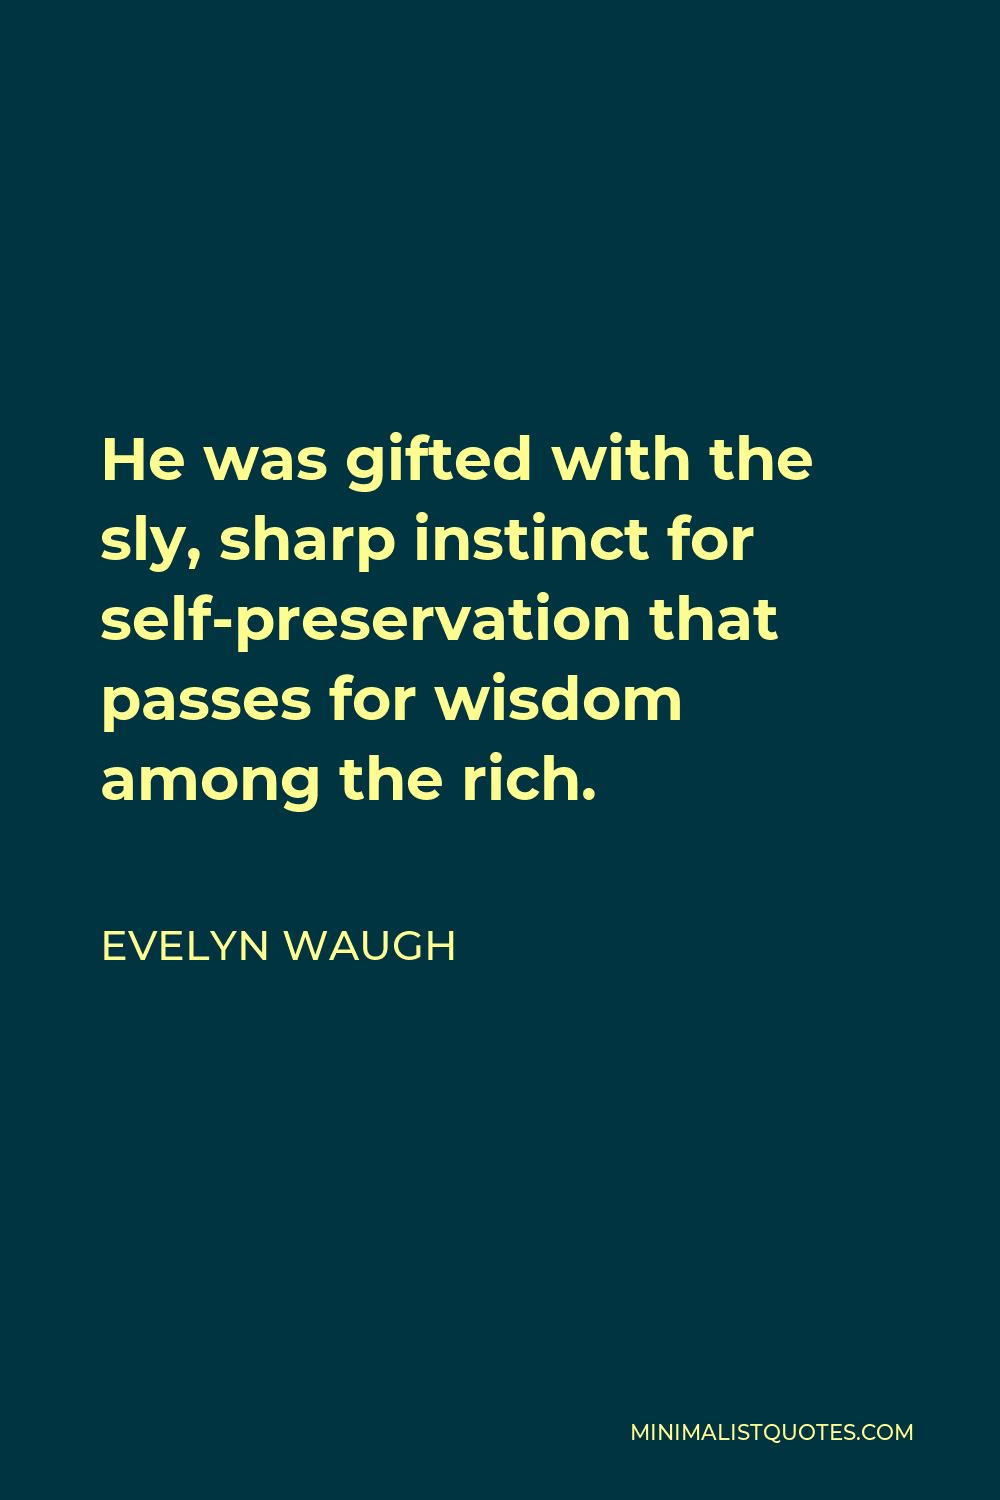 Evelyn Waugh Quote - He was gifted with the sly, sharp instinct for self-preservation that passes for wisdom among the rich.